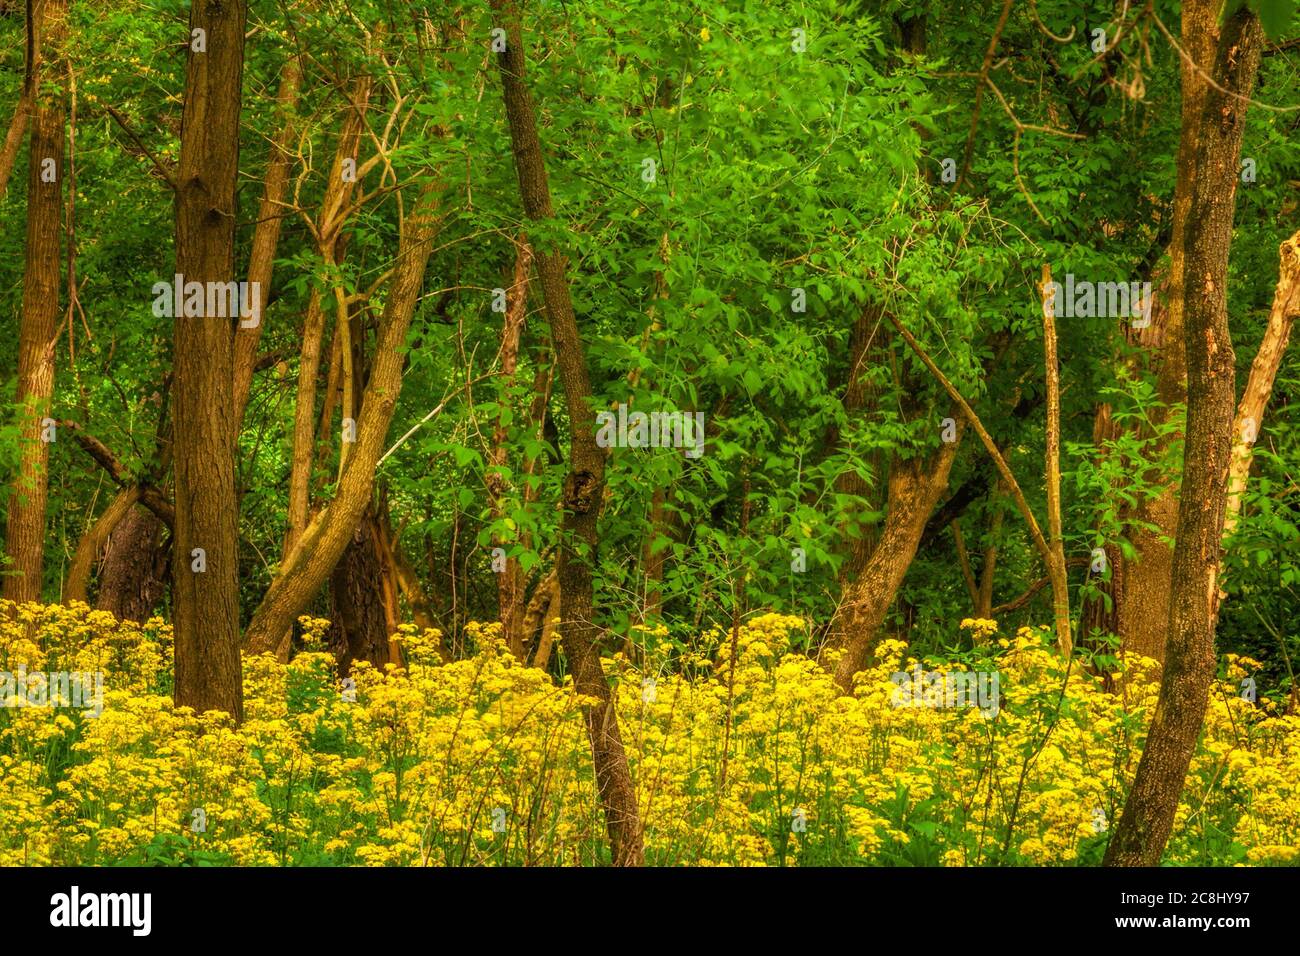 Field of yellow wildflowers in the woods Stock Photo